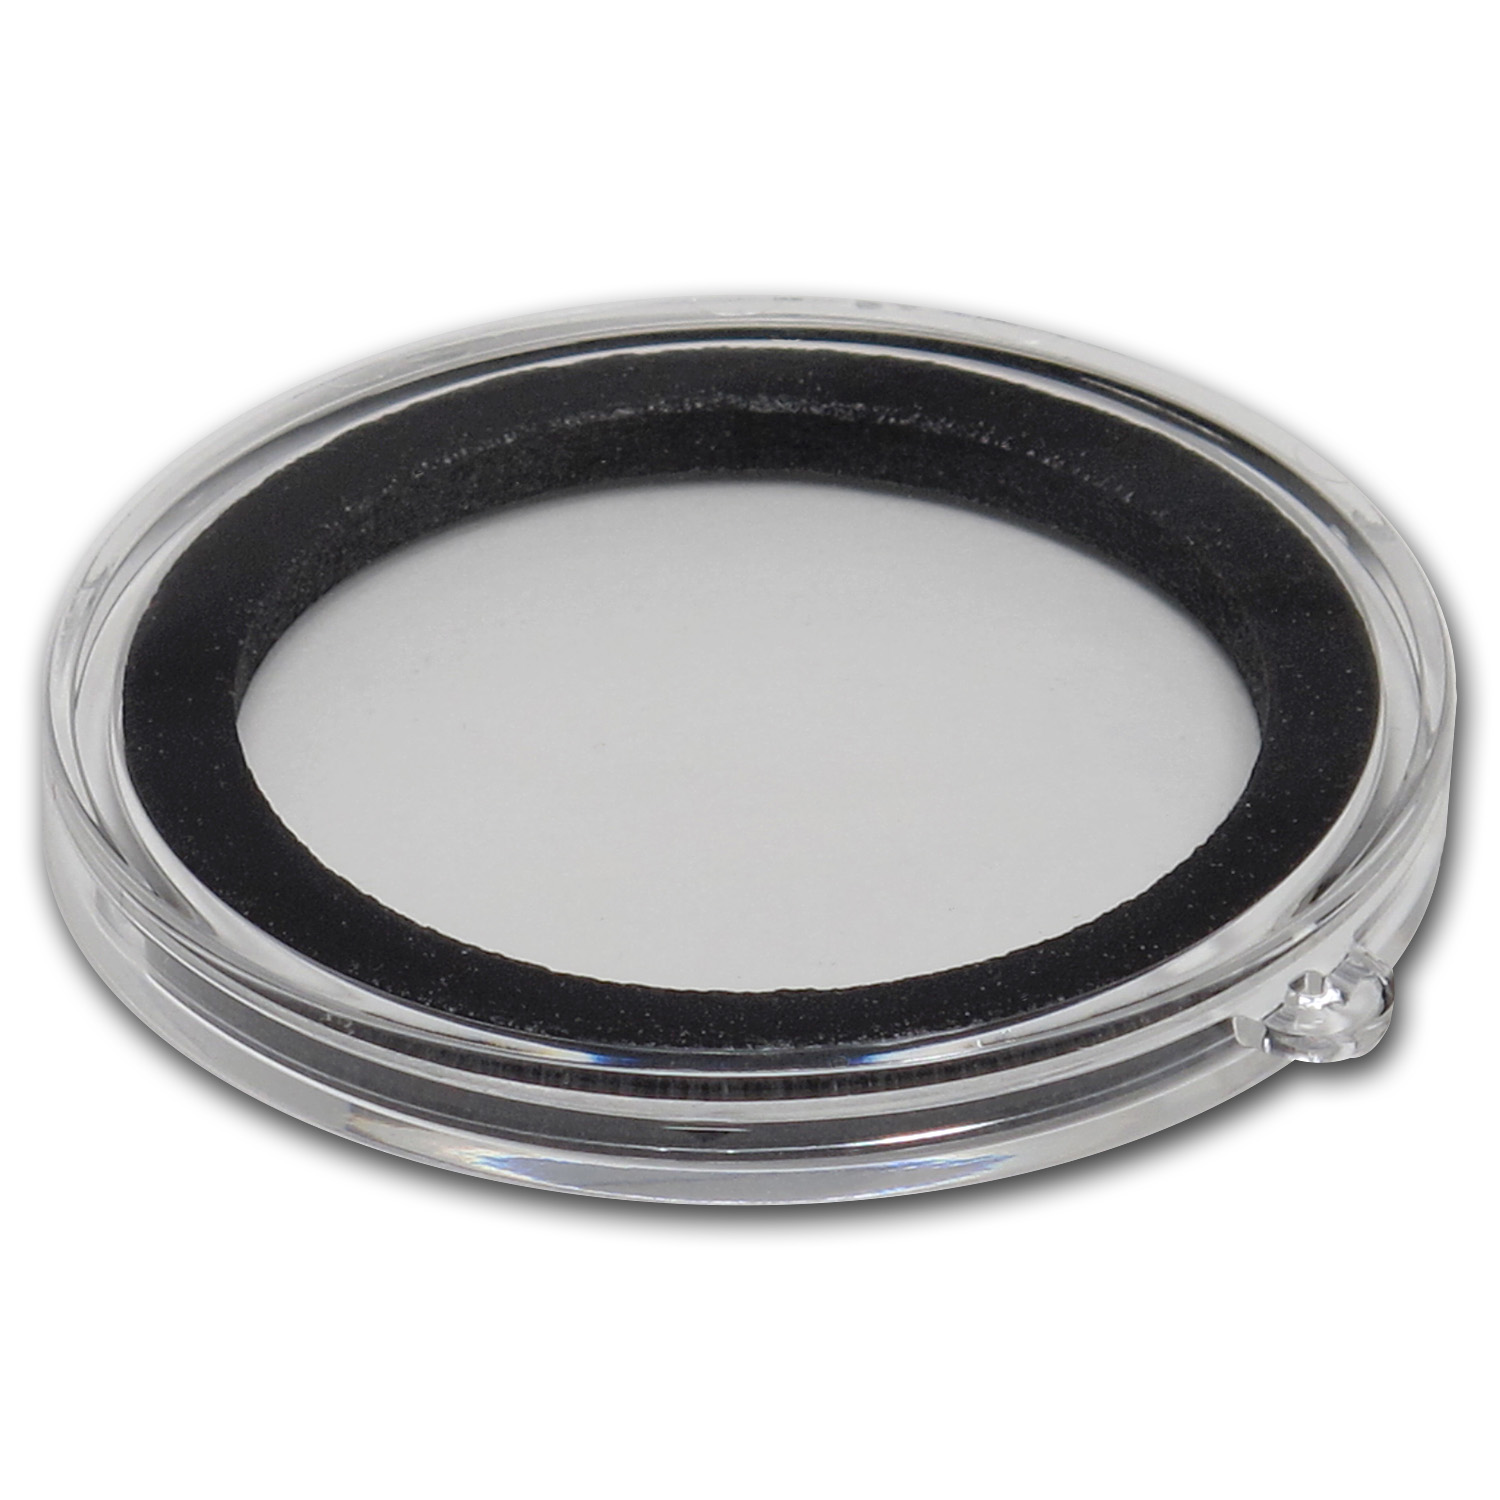 Buy Ornament Capsule for Silver Coins/Rounds - 38 mm (Black Ring)